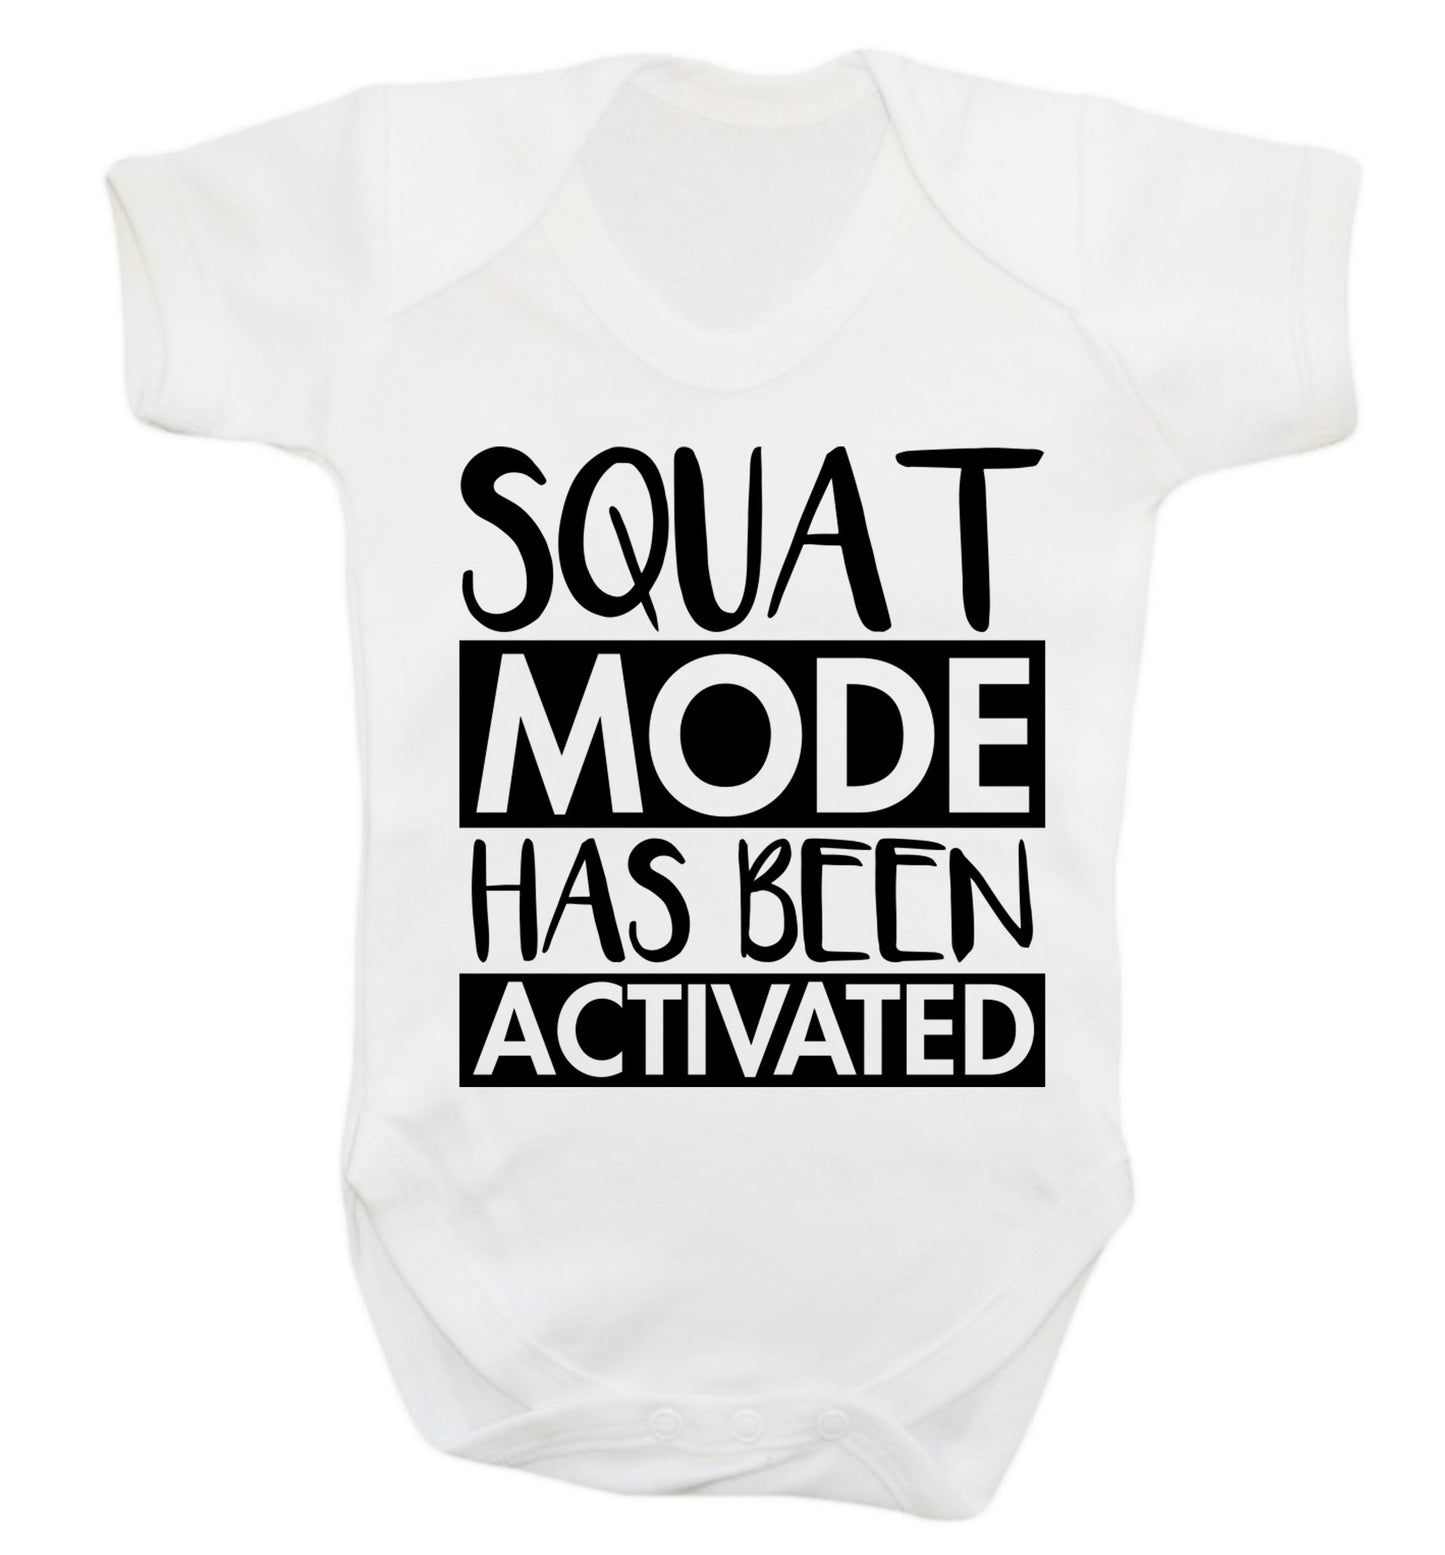 Squat mode activated Baby Vest white 18-24 months